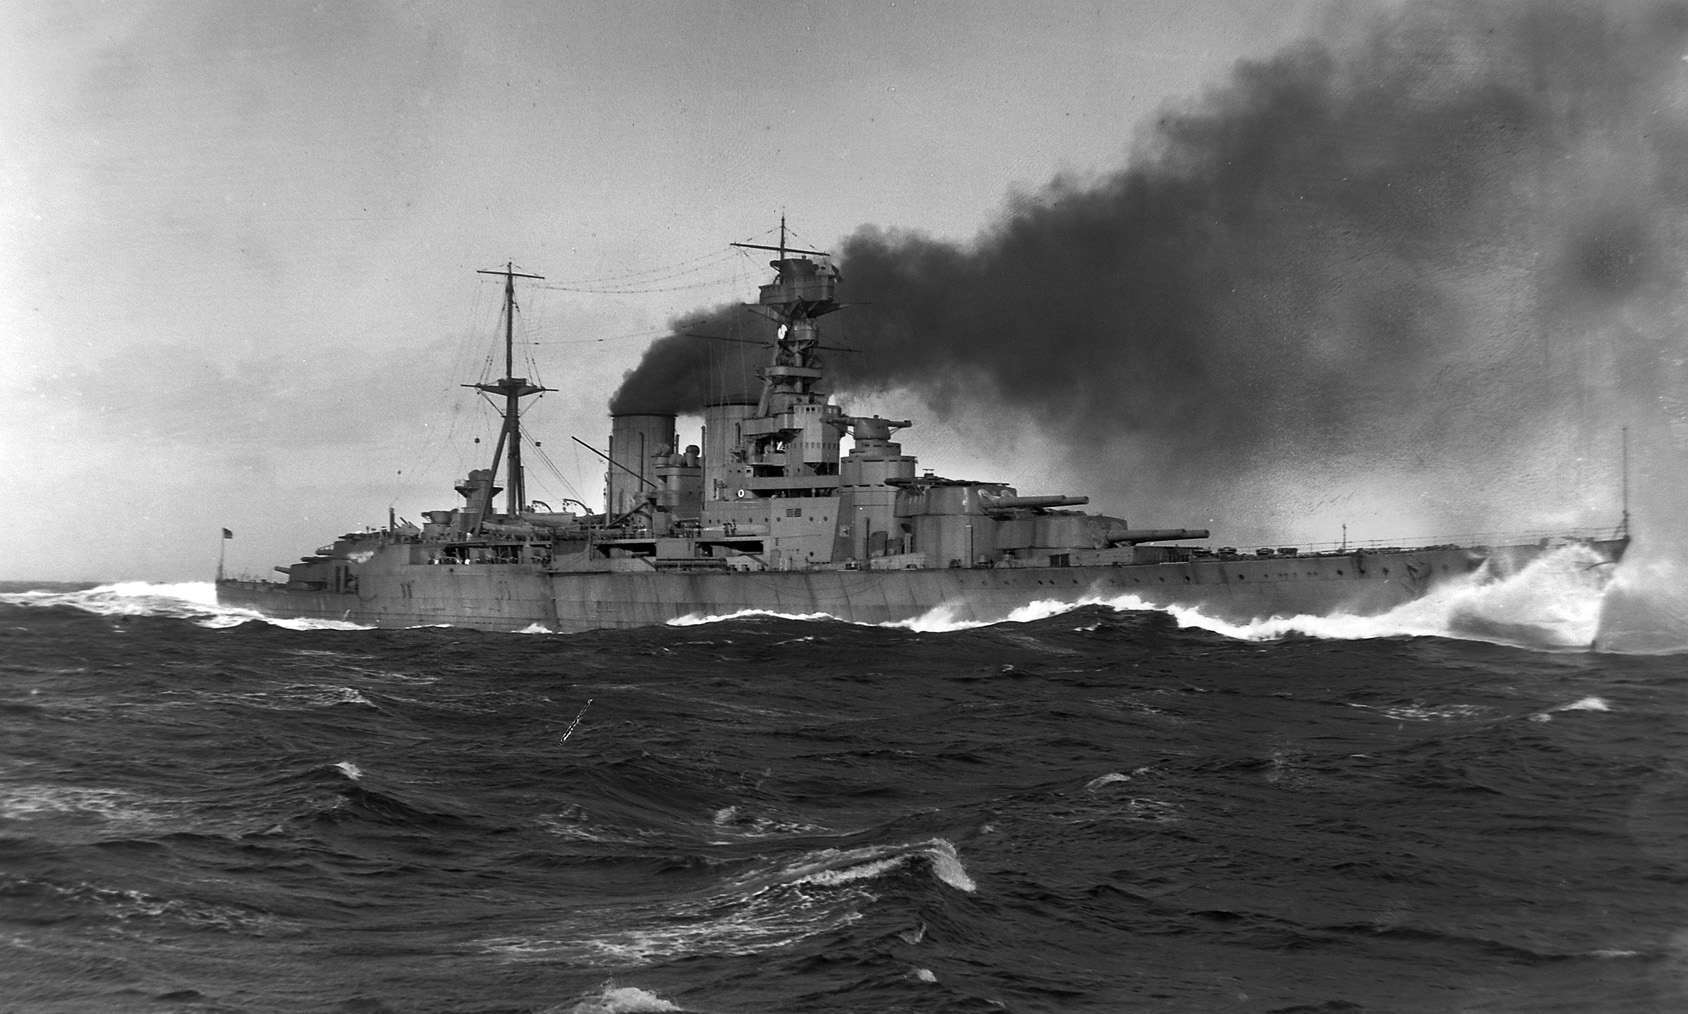 Only three British sailors survived the sinking of the battlecruiser HMS Hood, which was sunk during the Battle of Denmark Strait in May 1941.